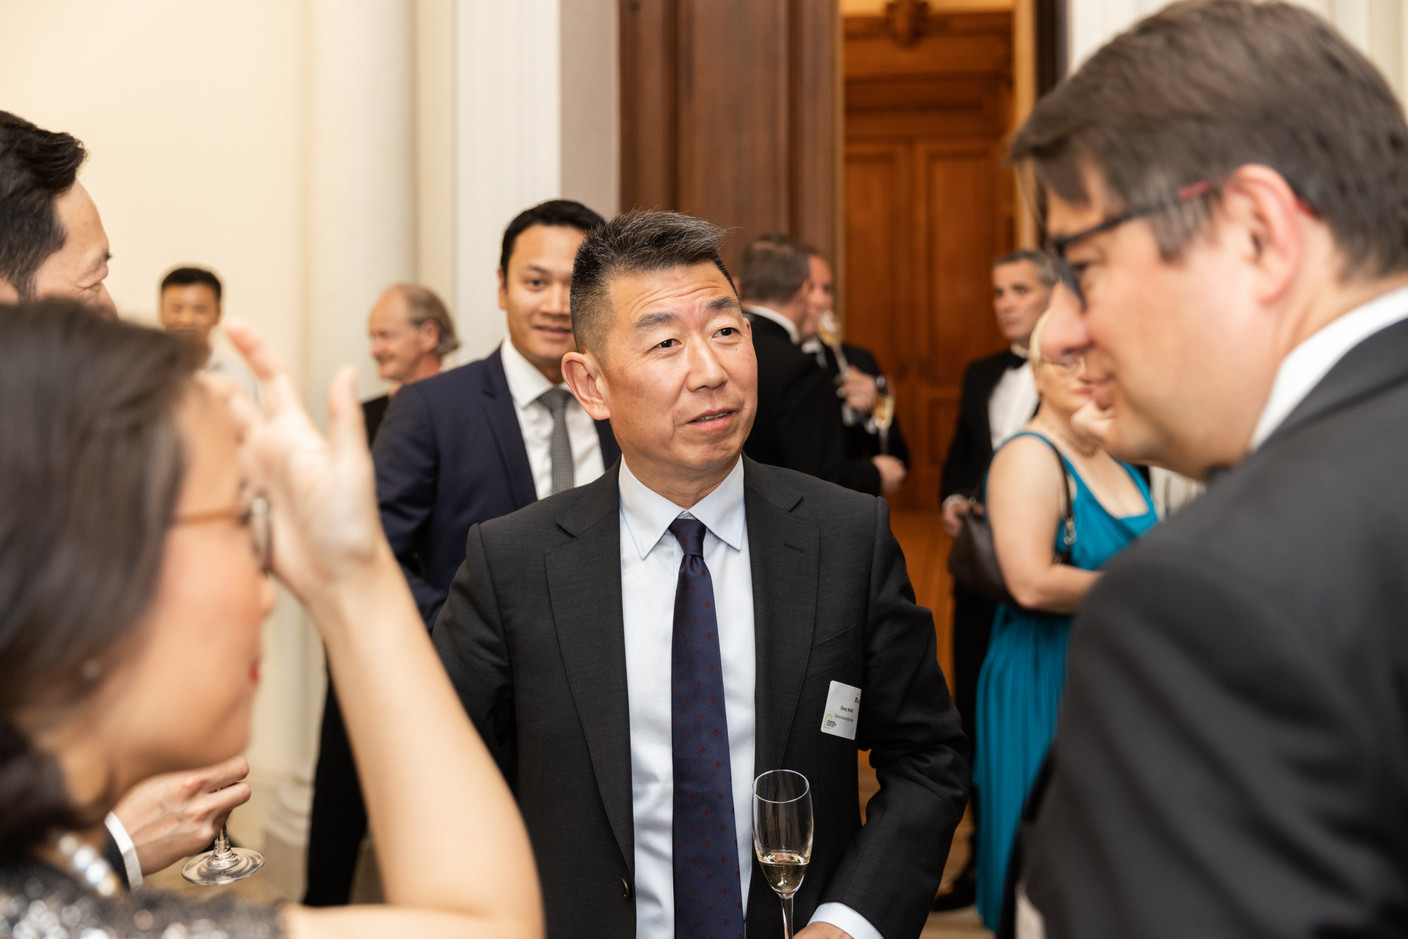 Dong Wang (China Everbright Bank) at a gala dinner to launch EY Luxembourg's 2023 attractiveness survey, held at the Cercle Cité on 15 June. Photo: Romain Gamba/Maison Moderne